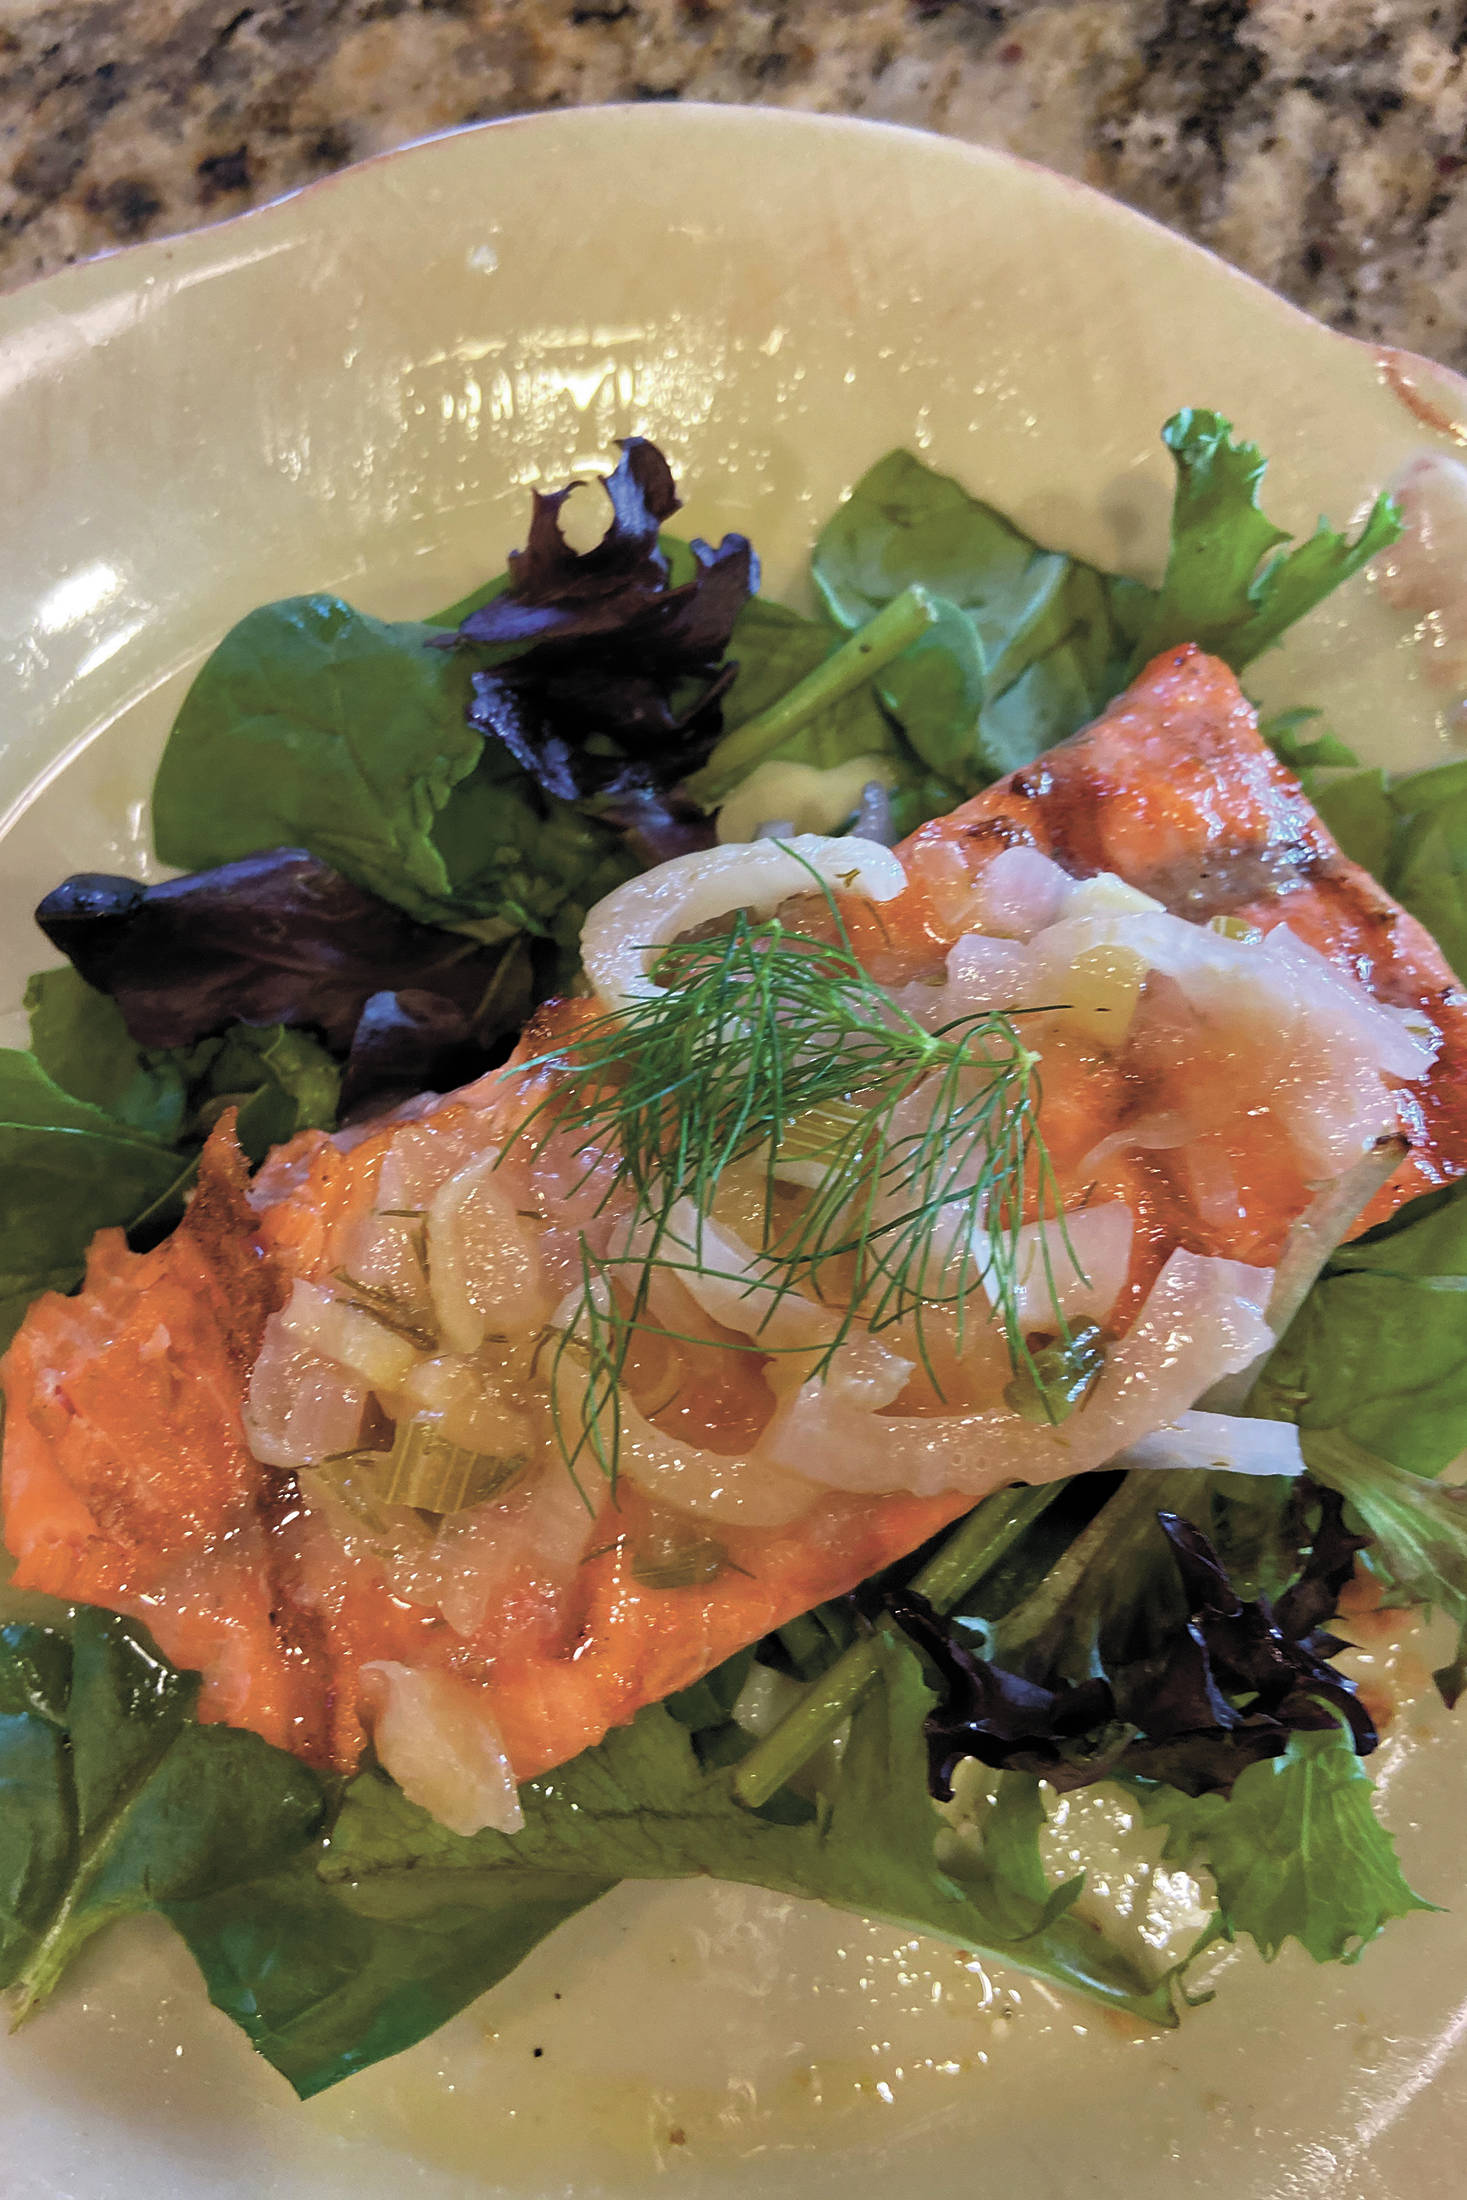 A salmon dish is ready to eat, prepared by Teri Robl in her Homer, Alaska kitchen. (Photo by Teri Robl)